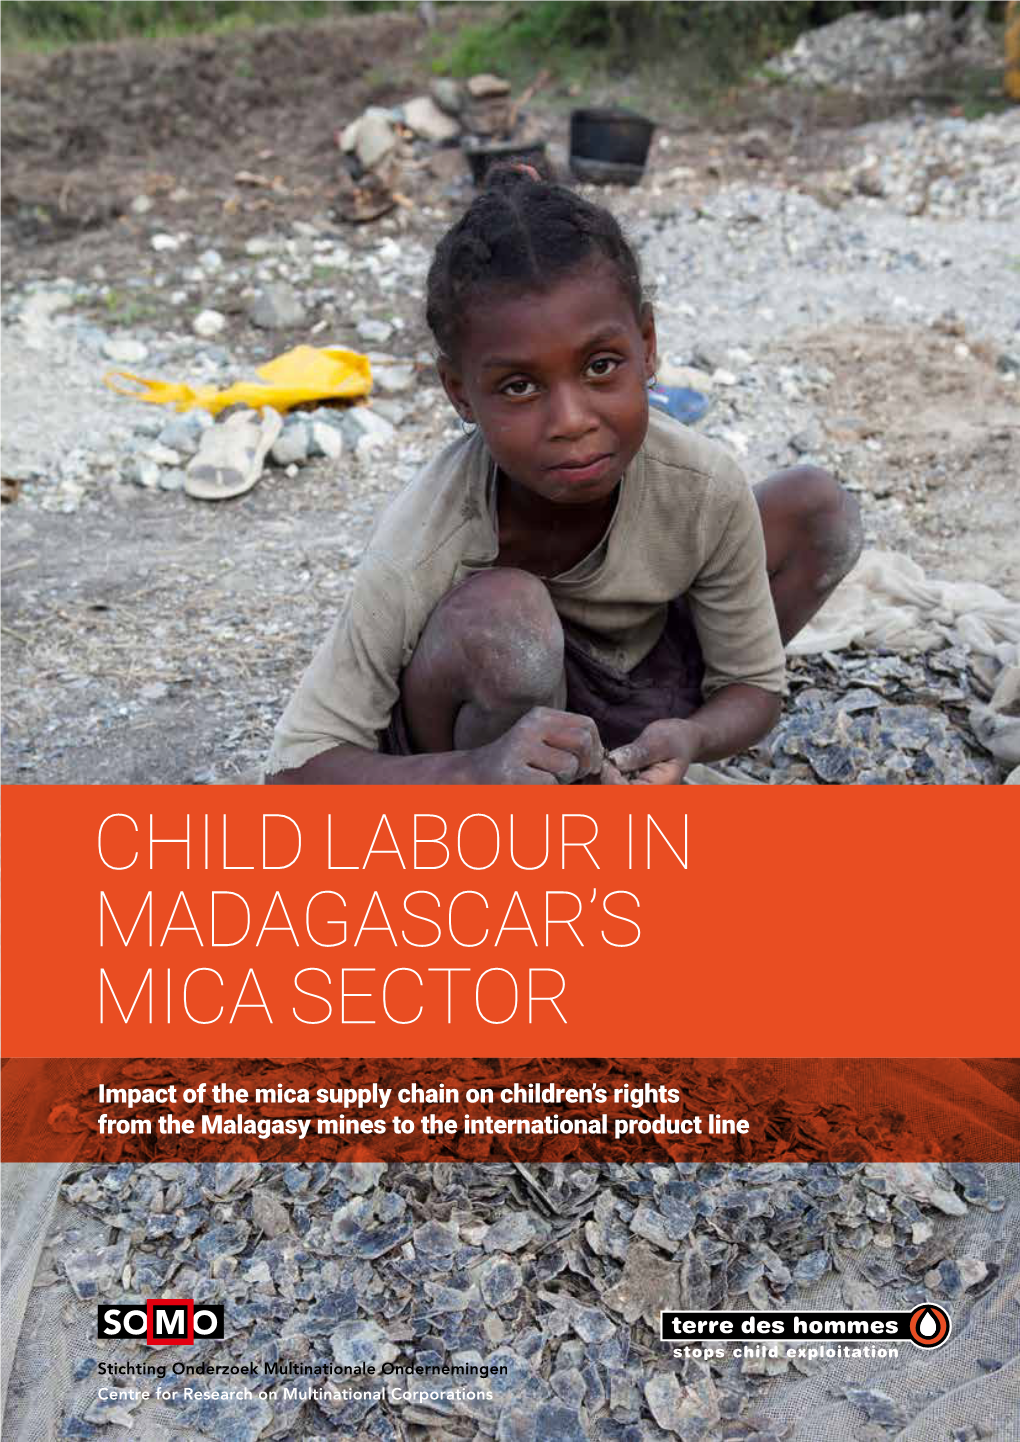 Child Labour in Madagascar's Mica Sector